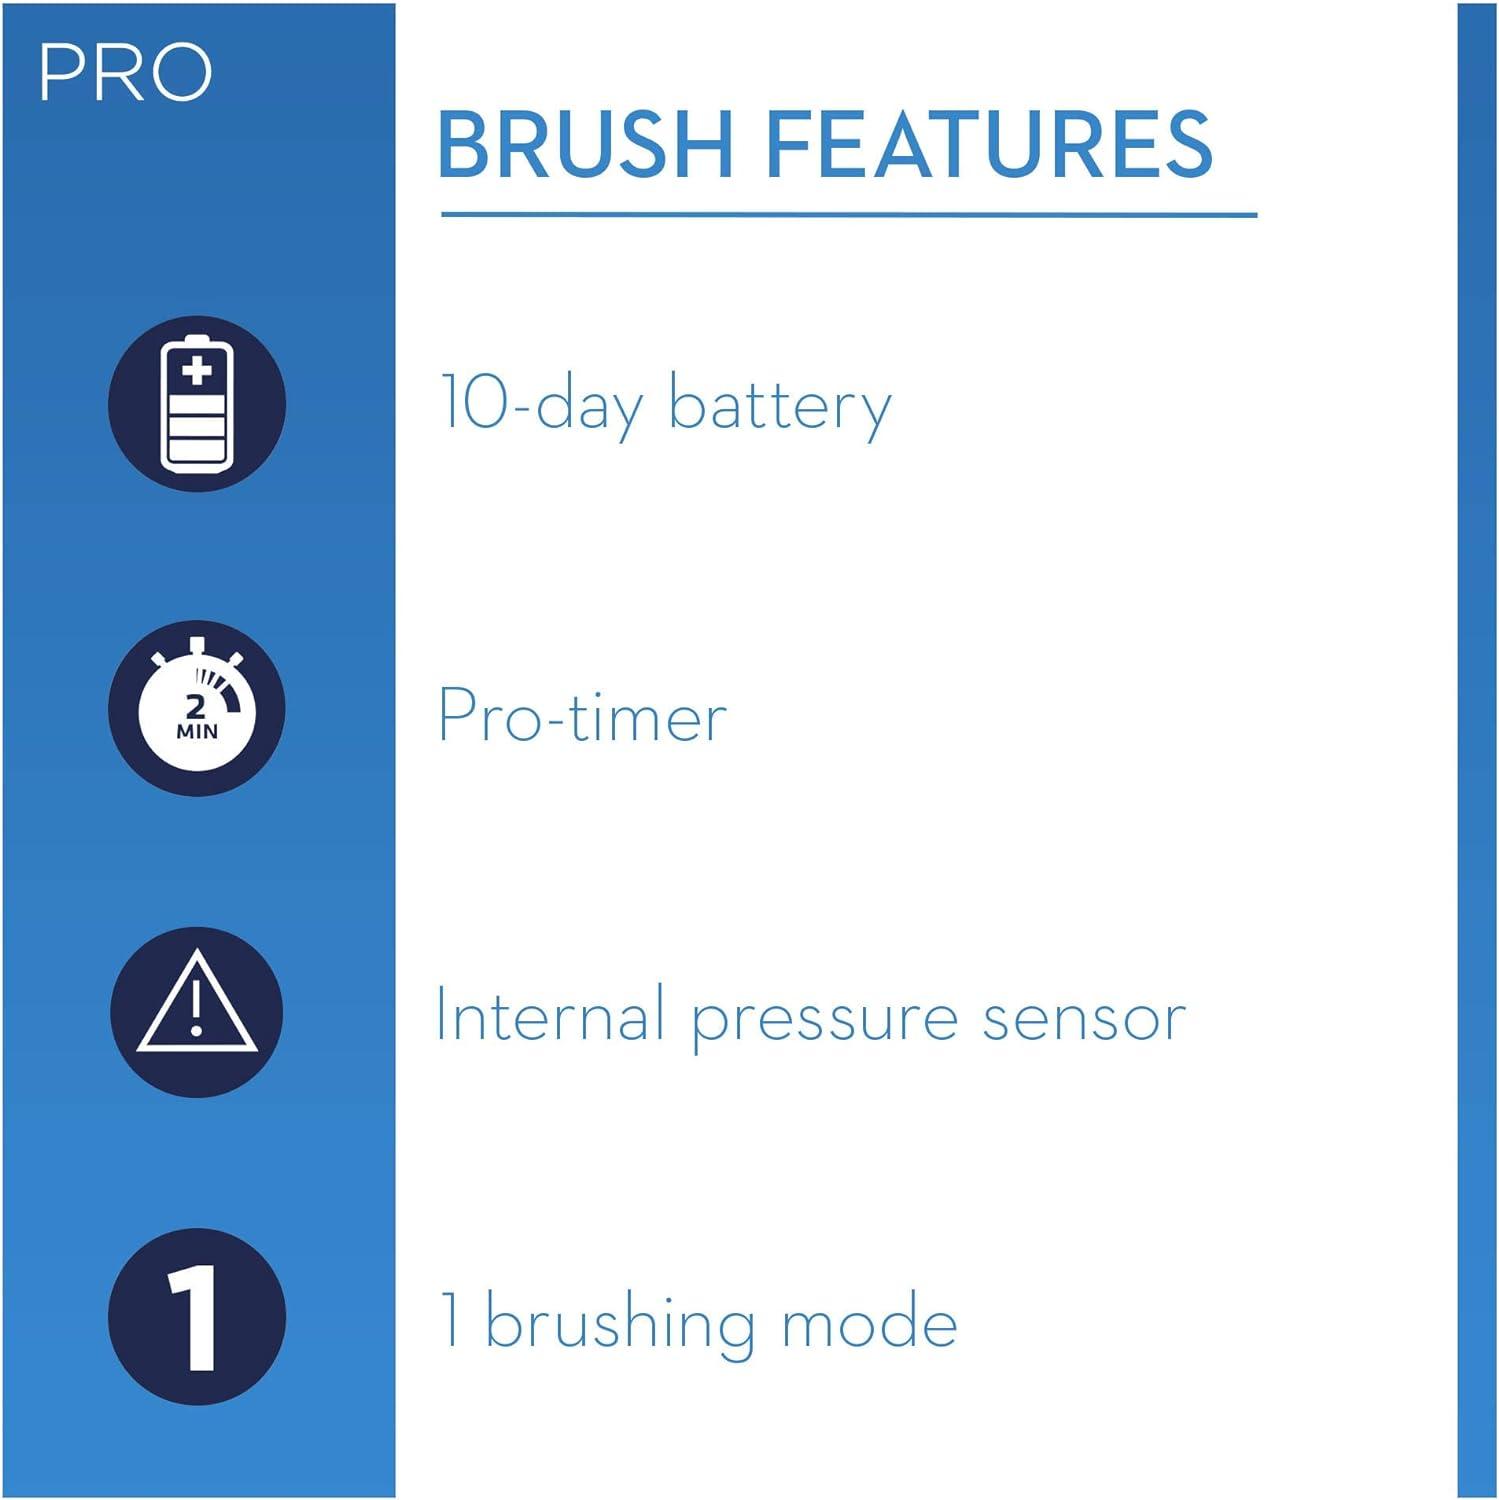 Oral-B Pro 1 Electric Toothbrush with Pressure Sensor - Wellness Shoppee